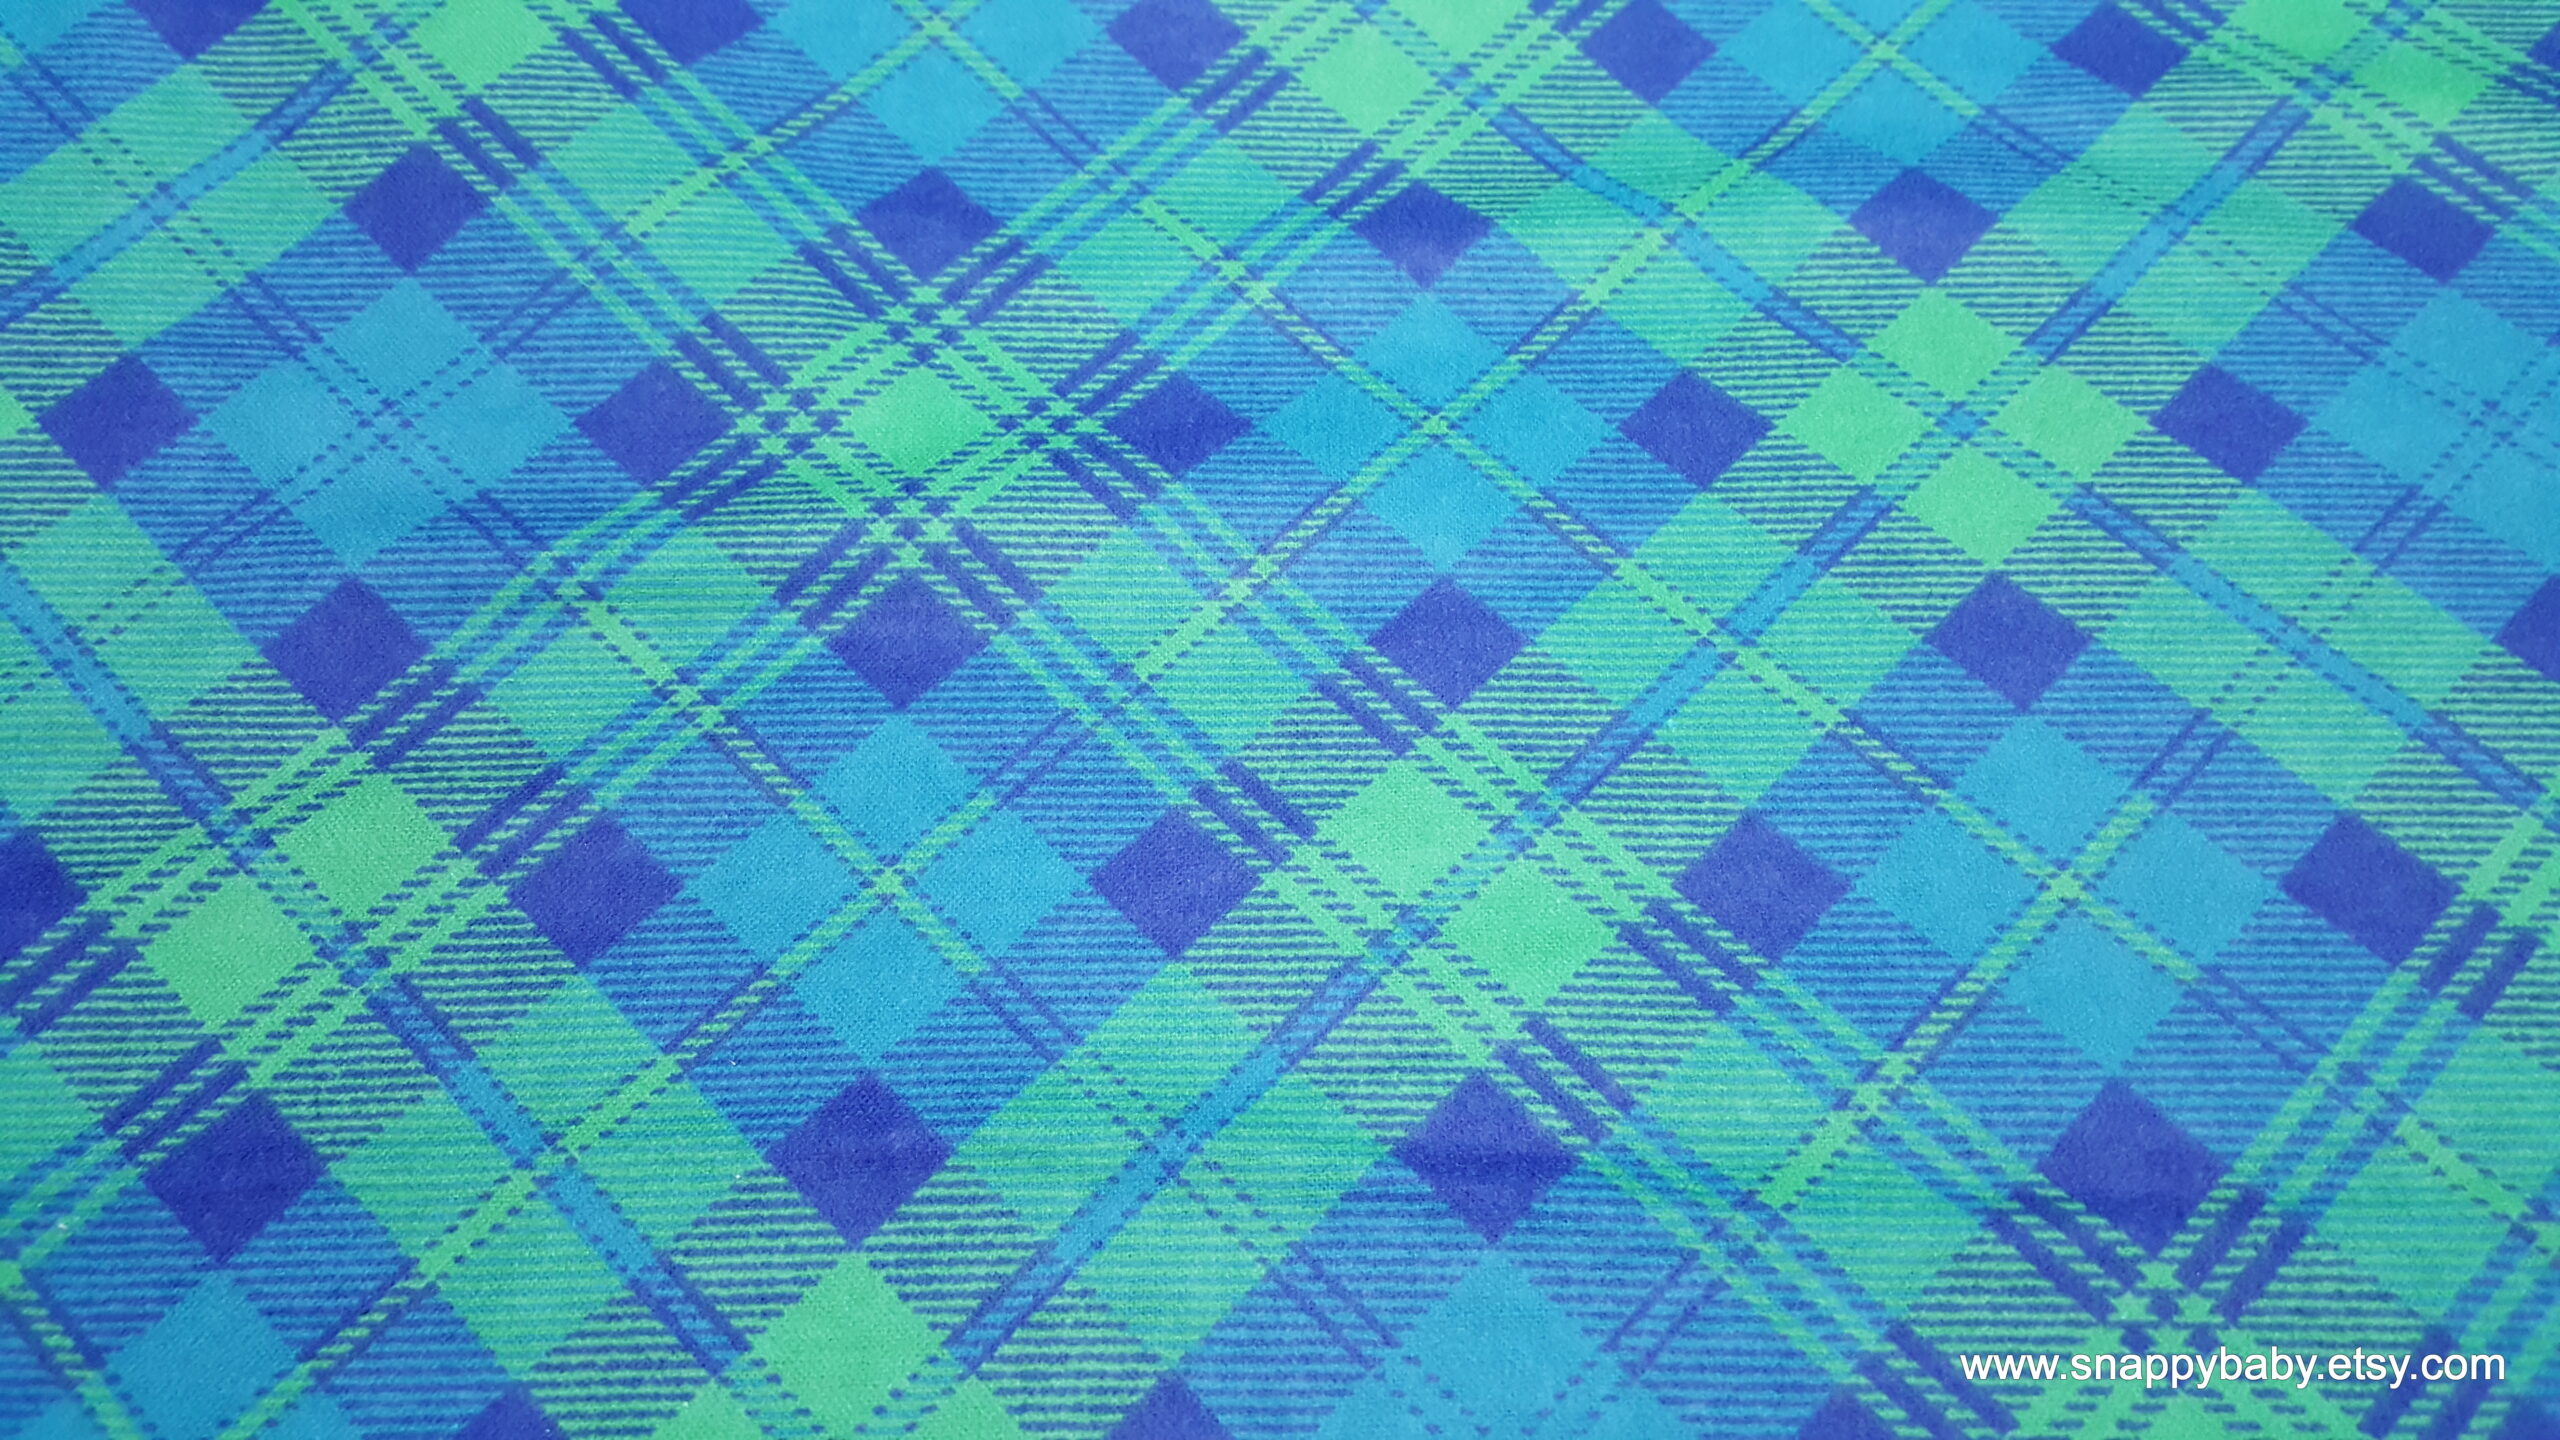 Flannel Fabric - Blue Green Bias Plaid - By the yard - 100% Cotton Flannel  - Merchlet